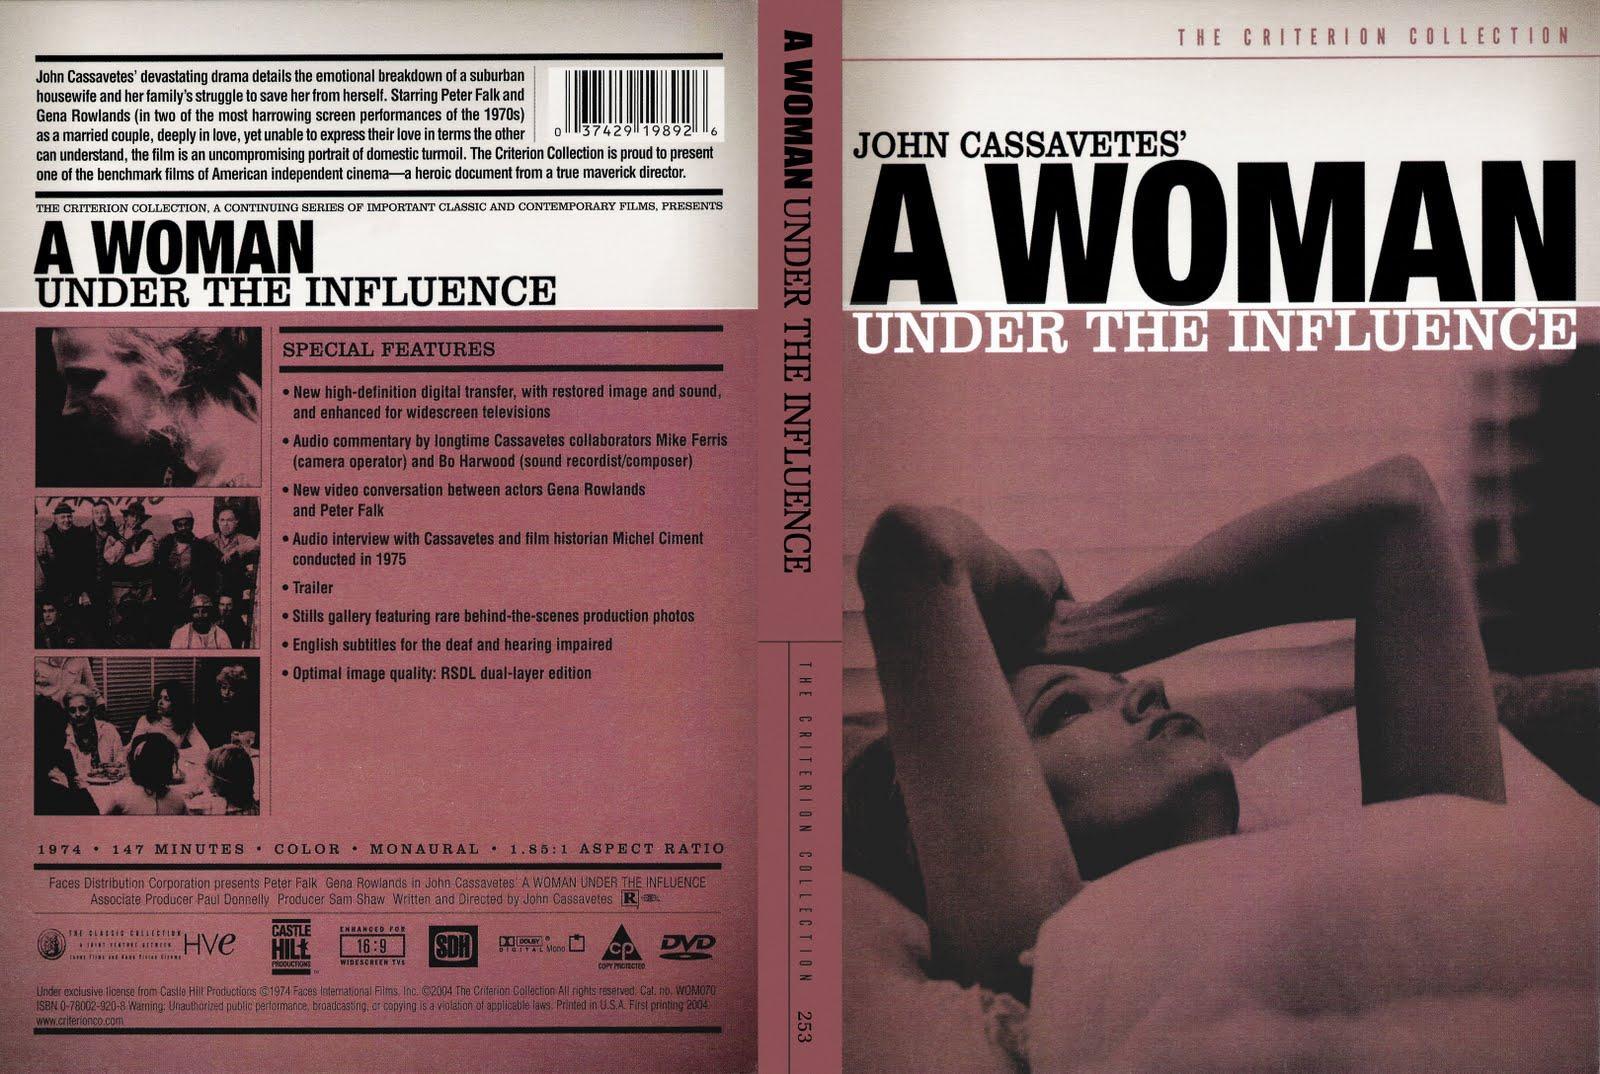 TRAILER - A Woman Under the Influence (1974)